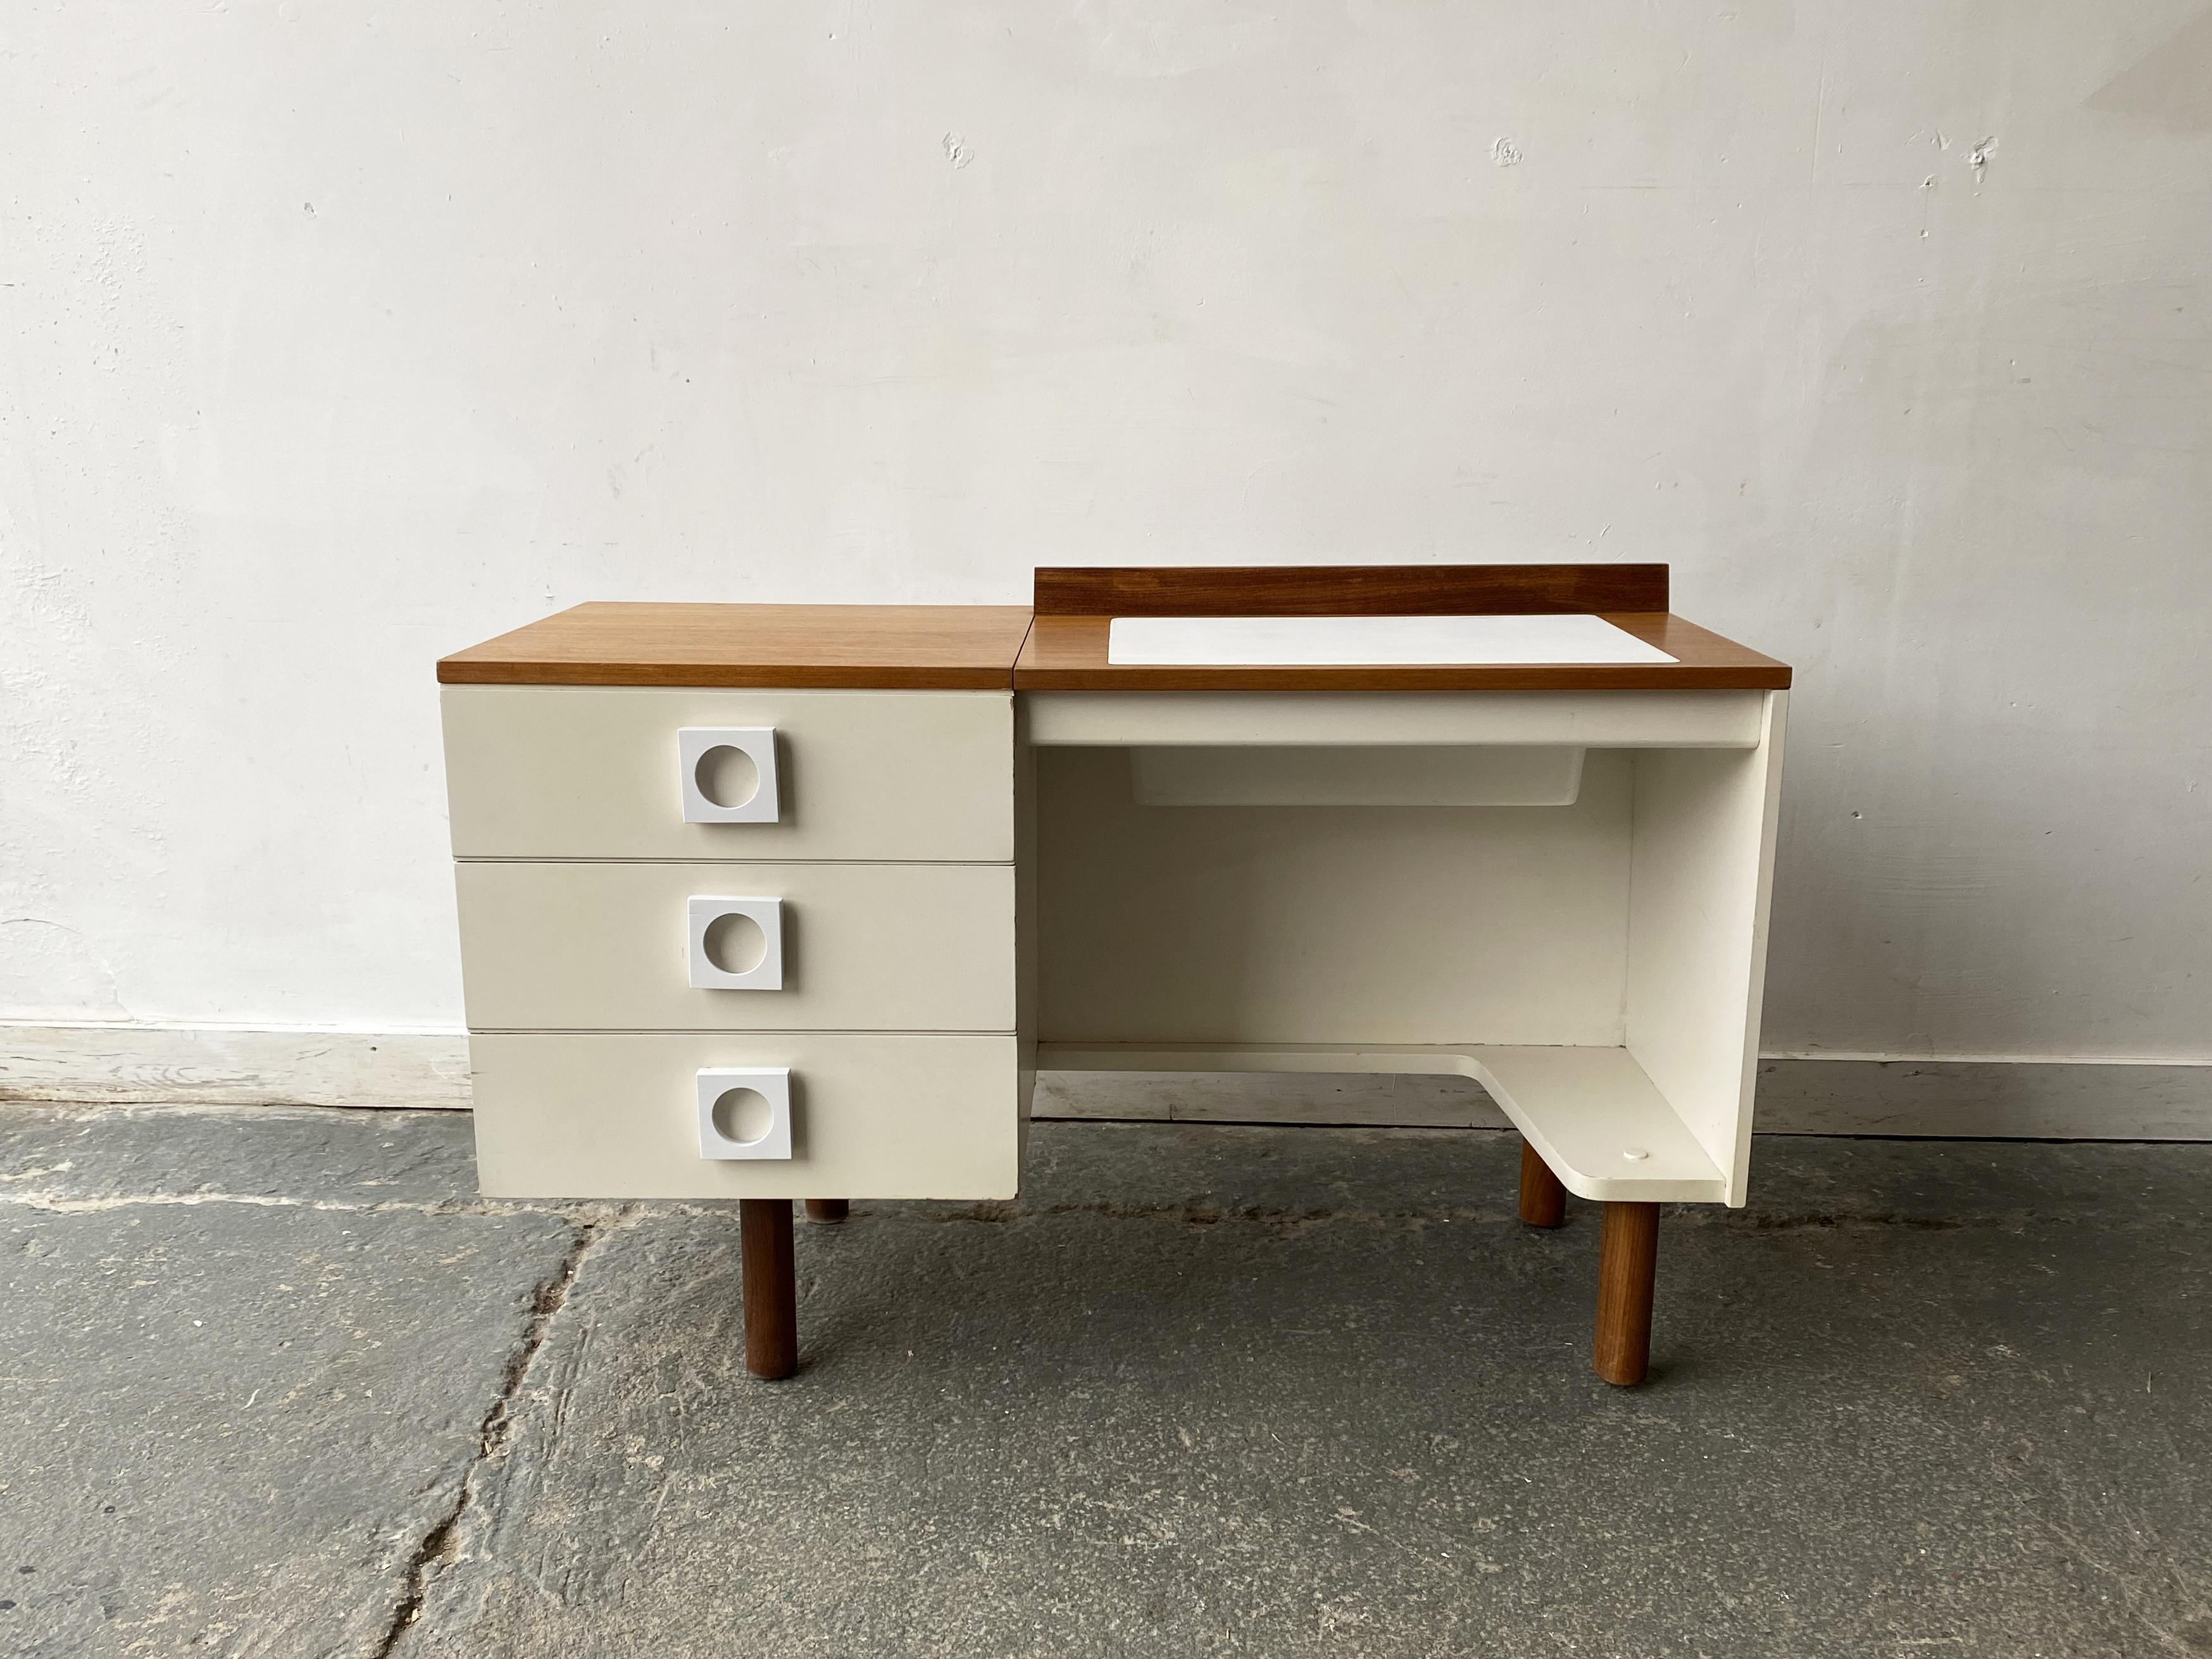 An unusual and rare combination desk and dressing table from English manufacturer Uniflex. With flap down  it is a work desk, lift the flap to reveal a mirror and it changes to a dressing table. Contrasting white melamine and natural coloured